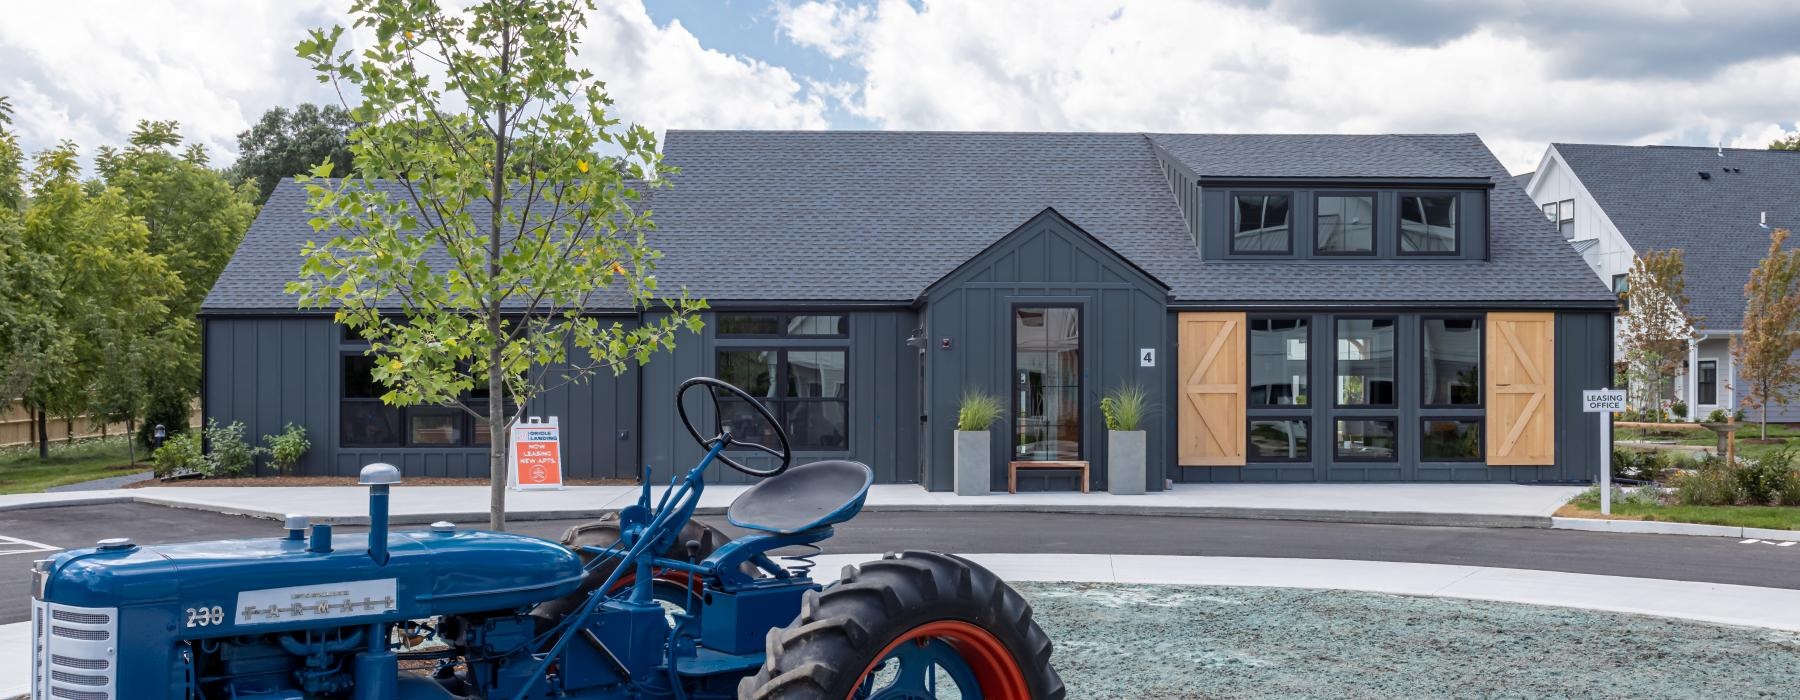 a building with a blue tractor in front of it